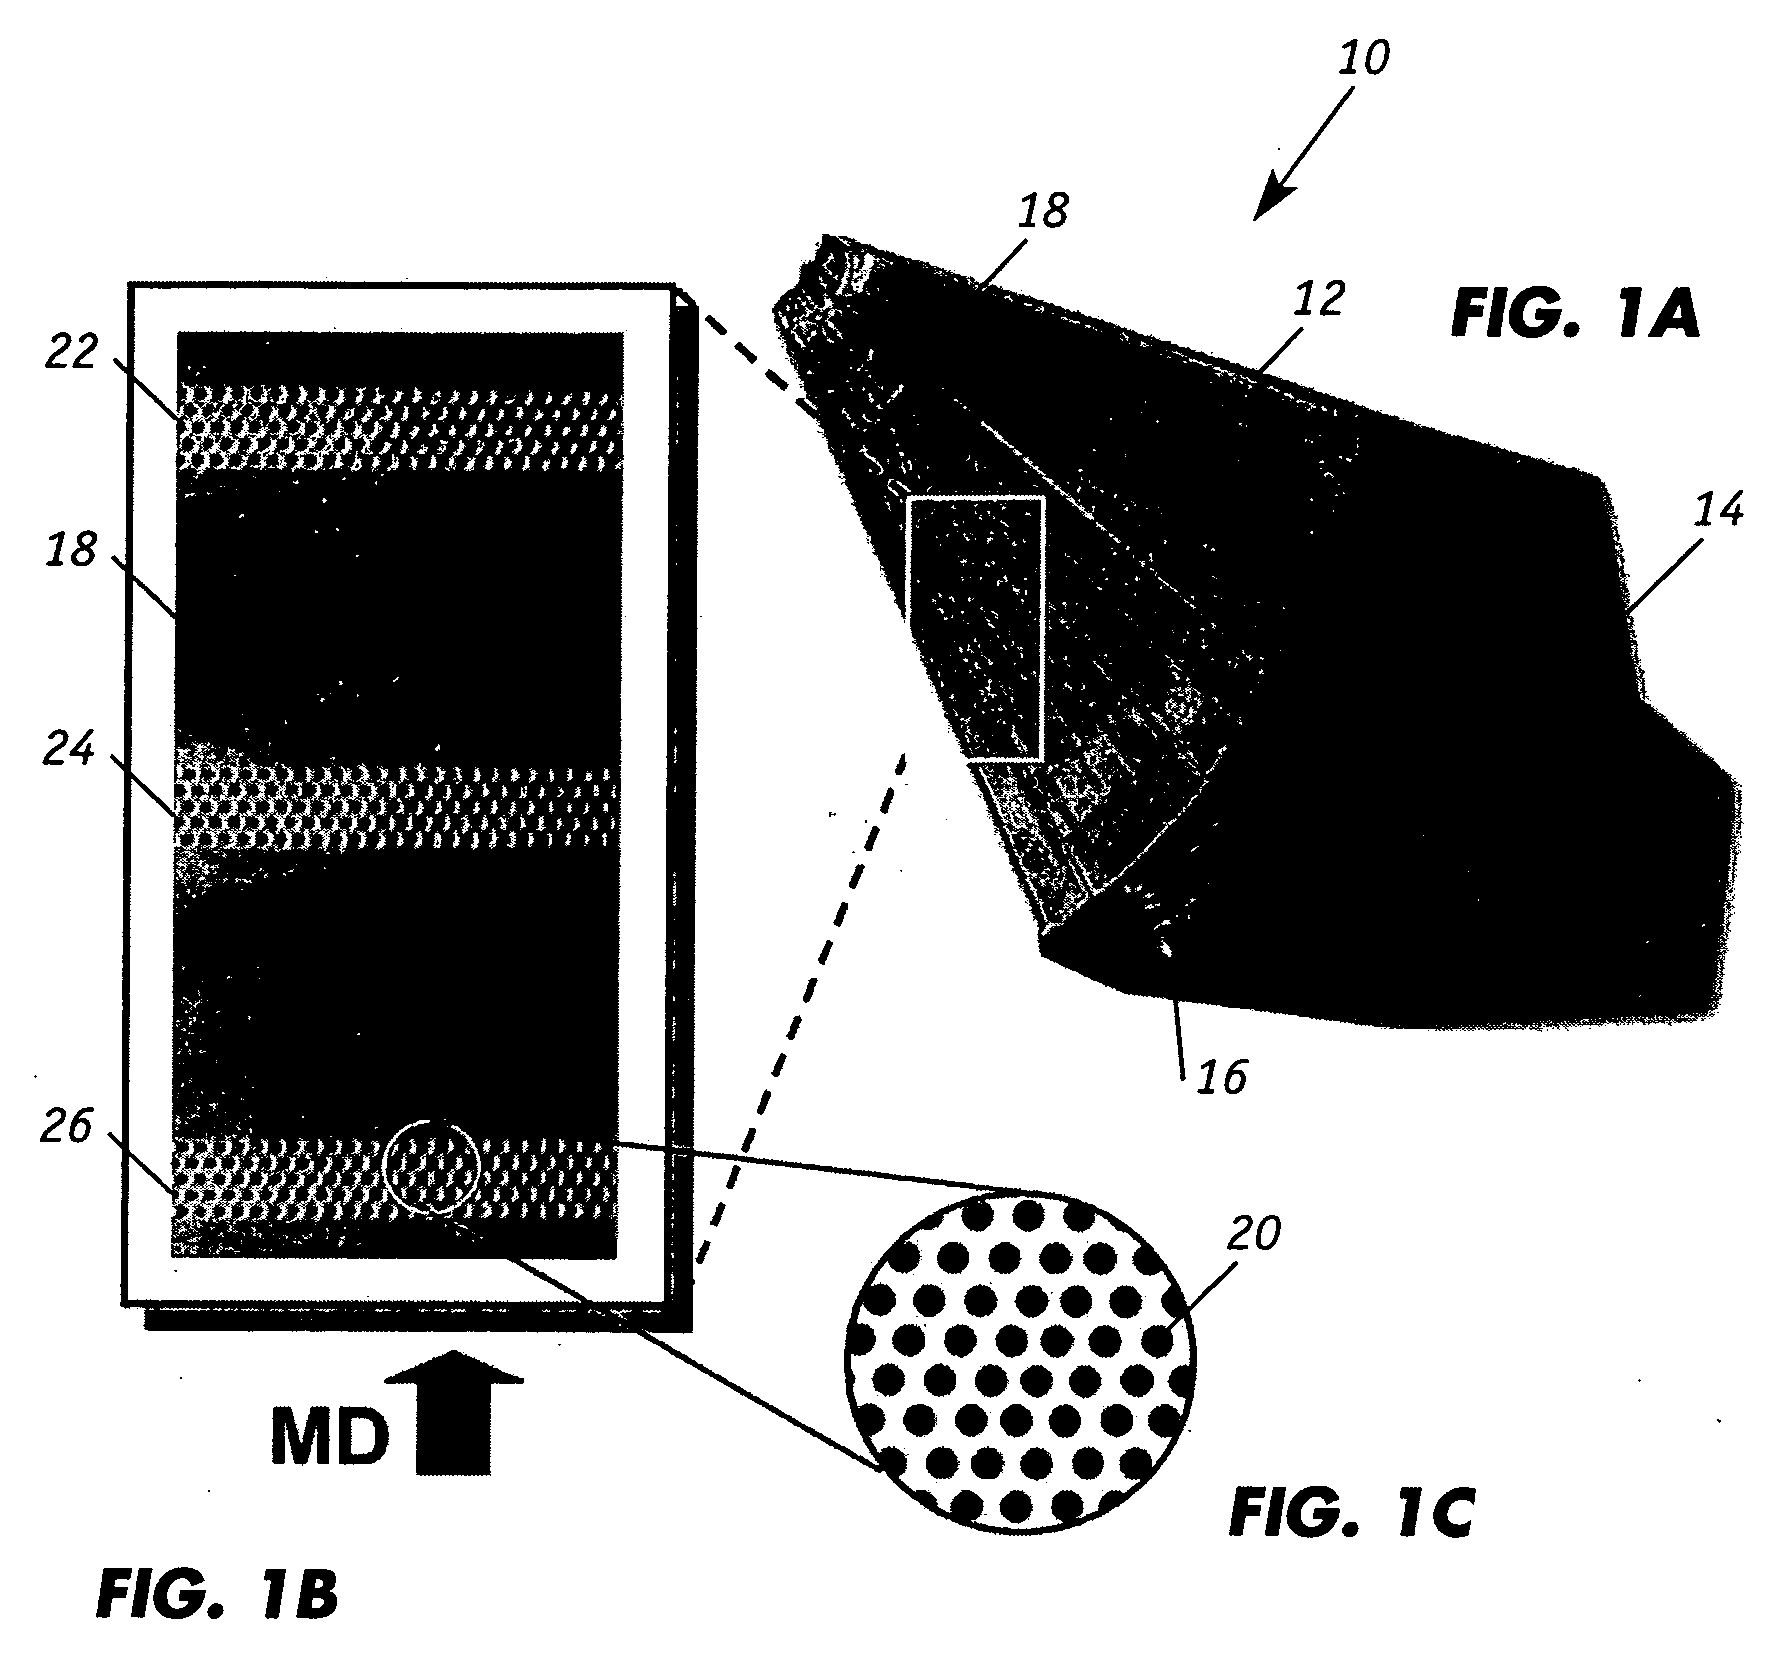 Steam distribution apparatus with removable cover for internal access